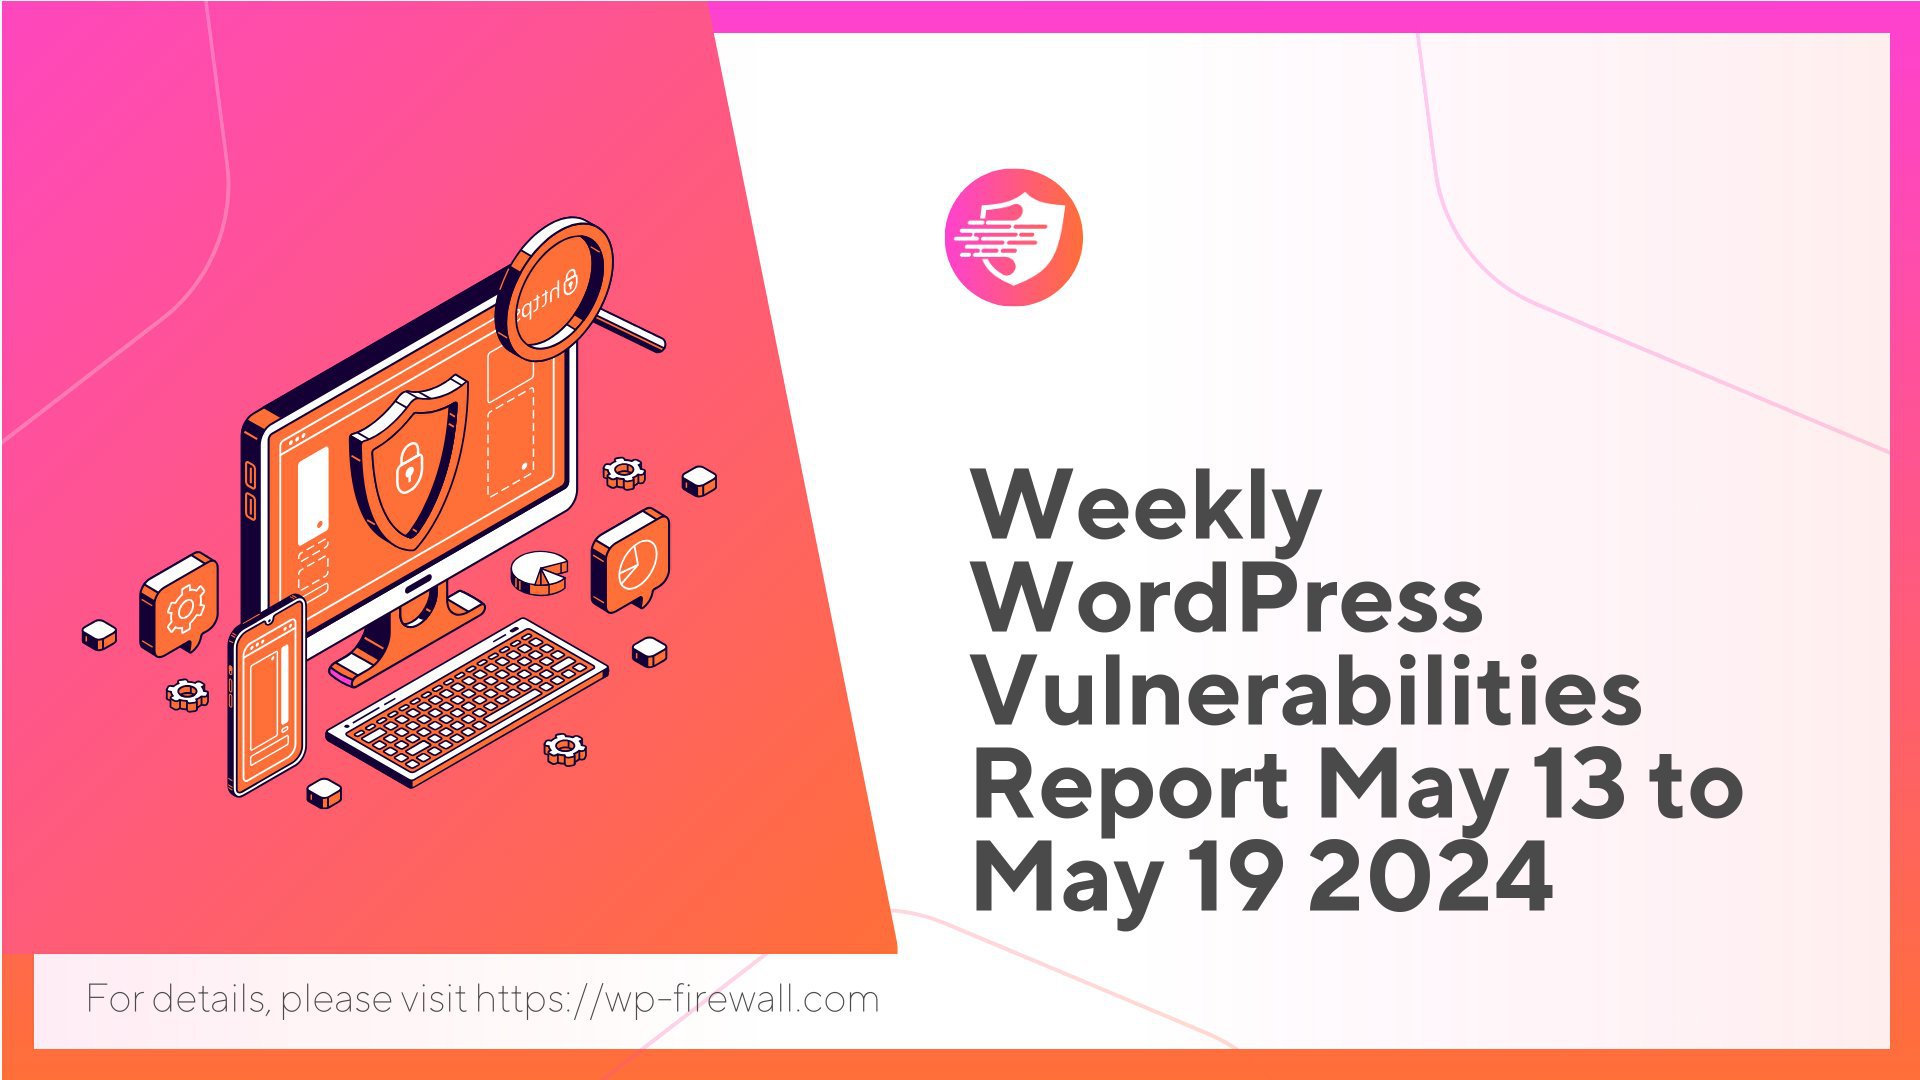 Weekly WordPress Vulnerabilities Report May 13 to May 19 2024 cover